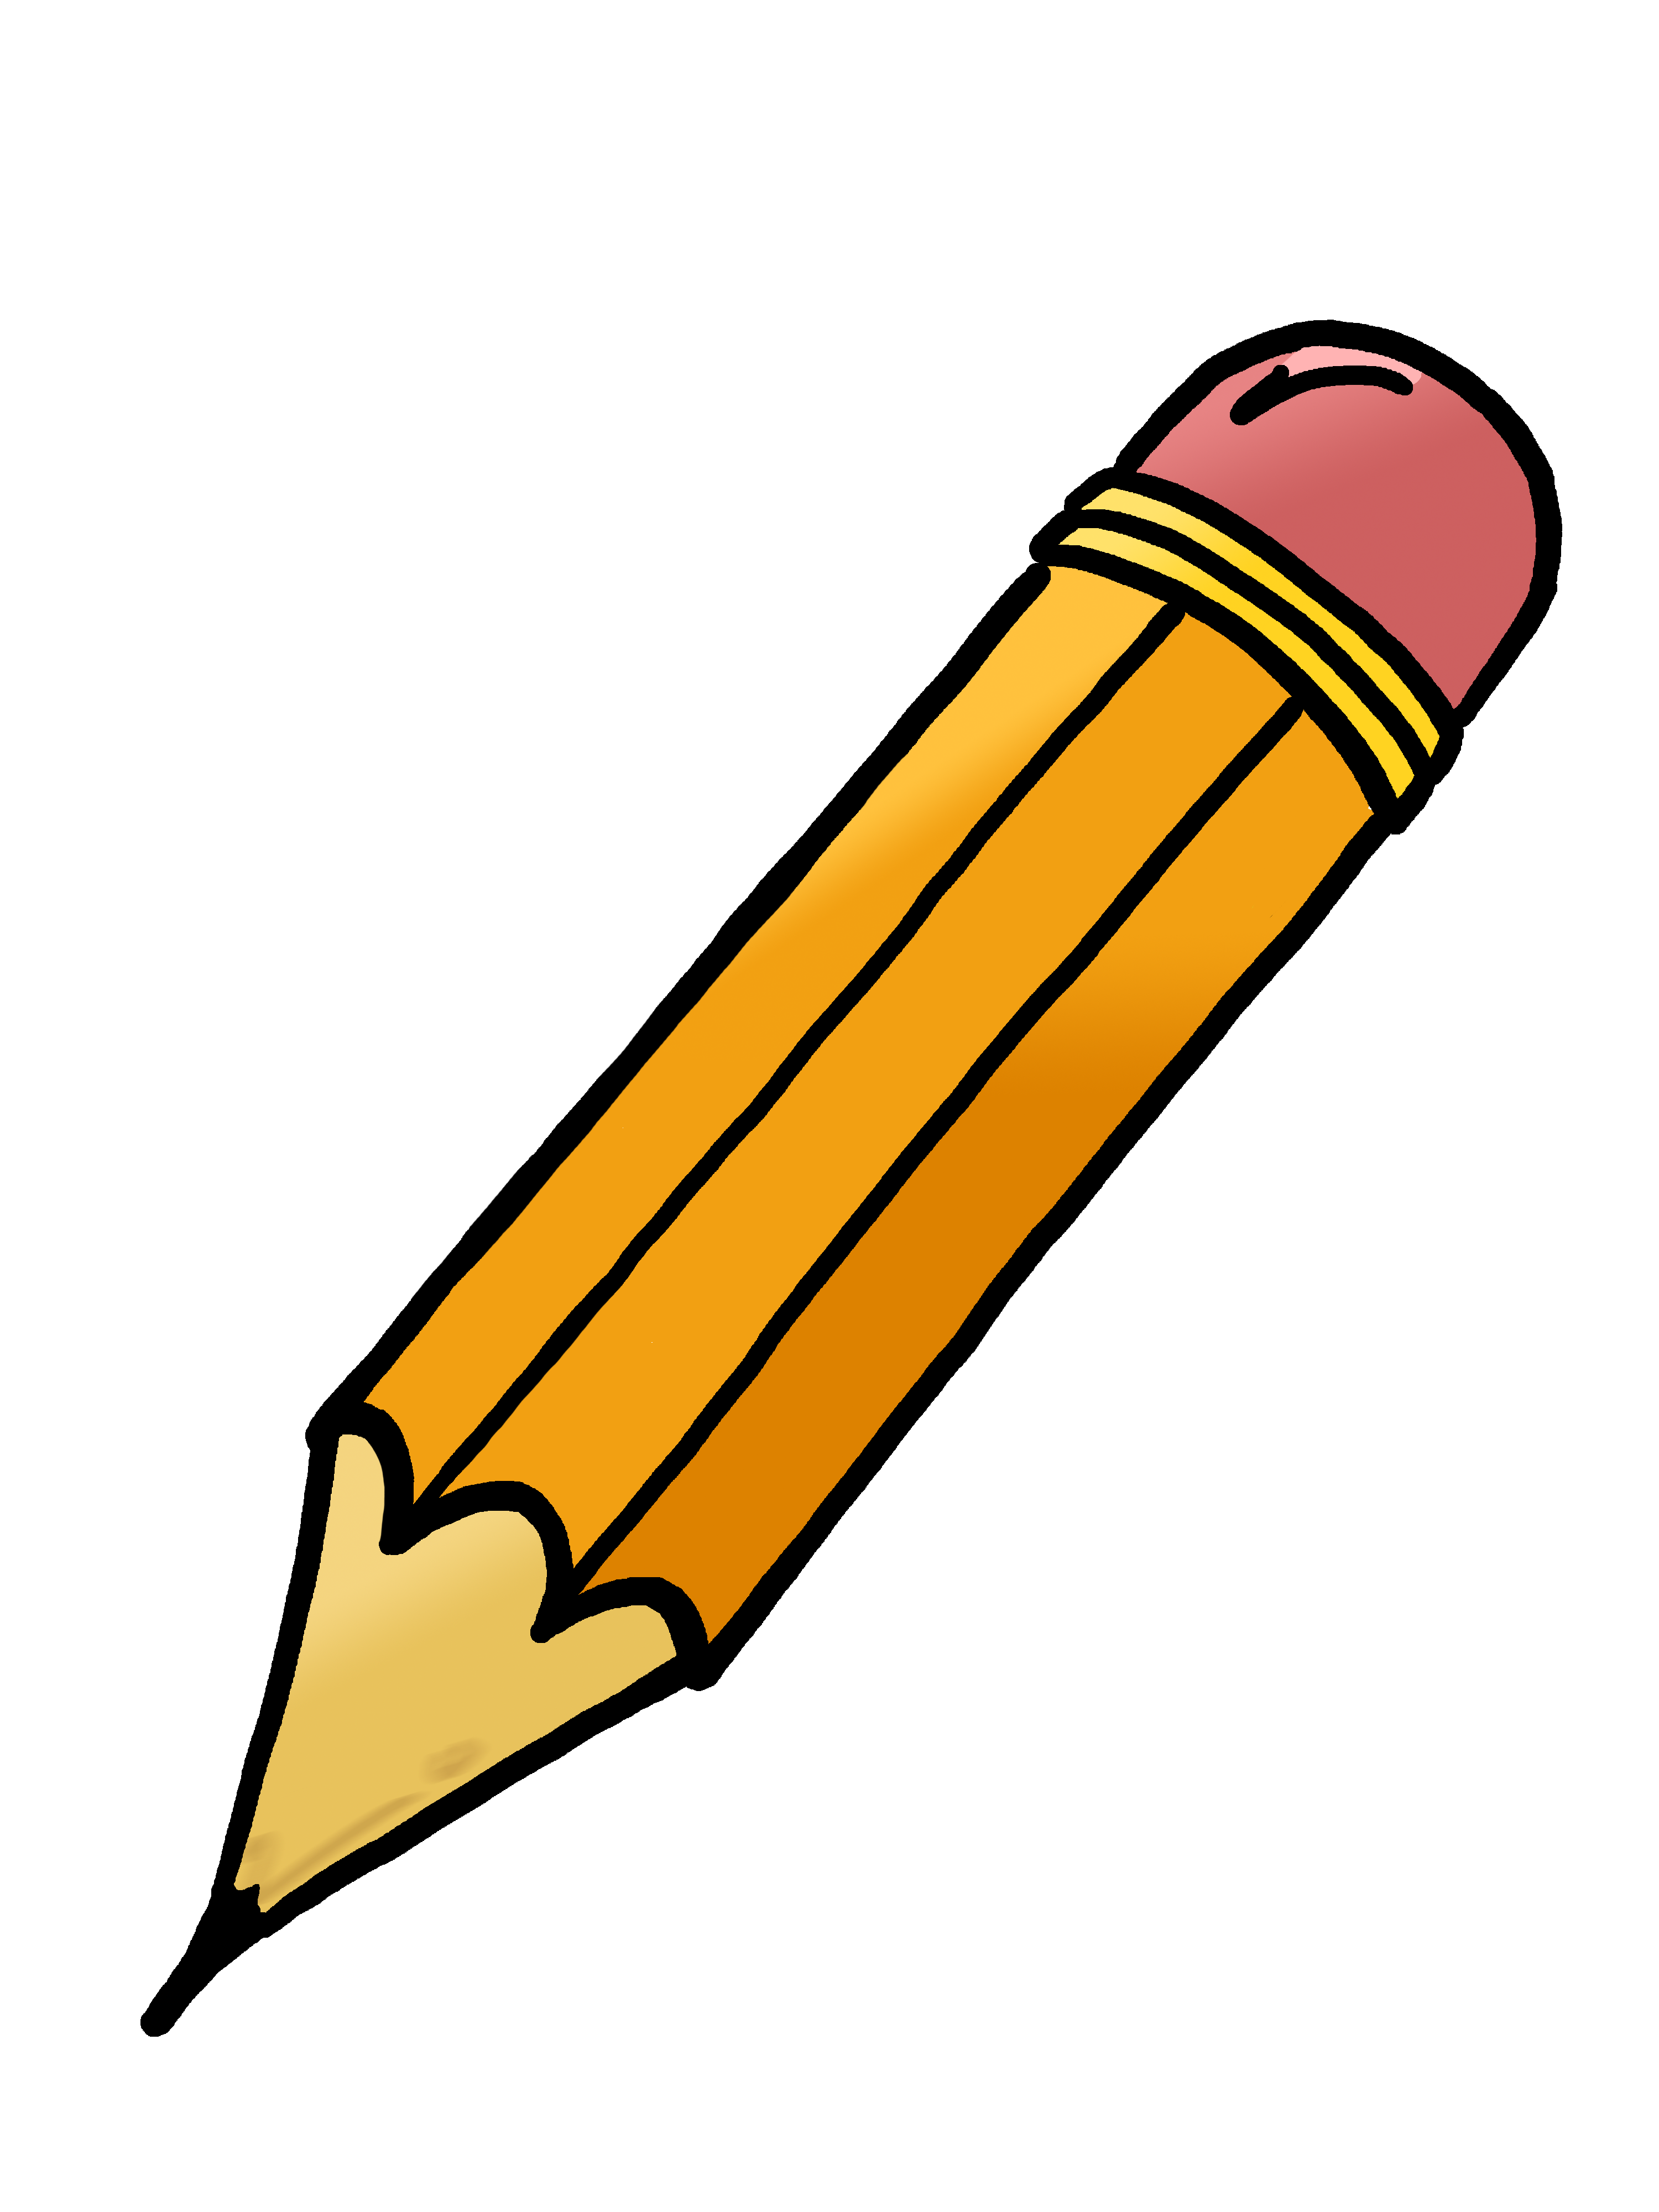 Pencil Clip Art Black And White - Free Clipart Images